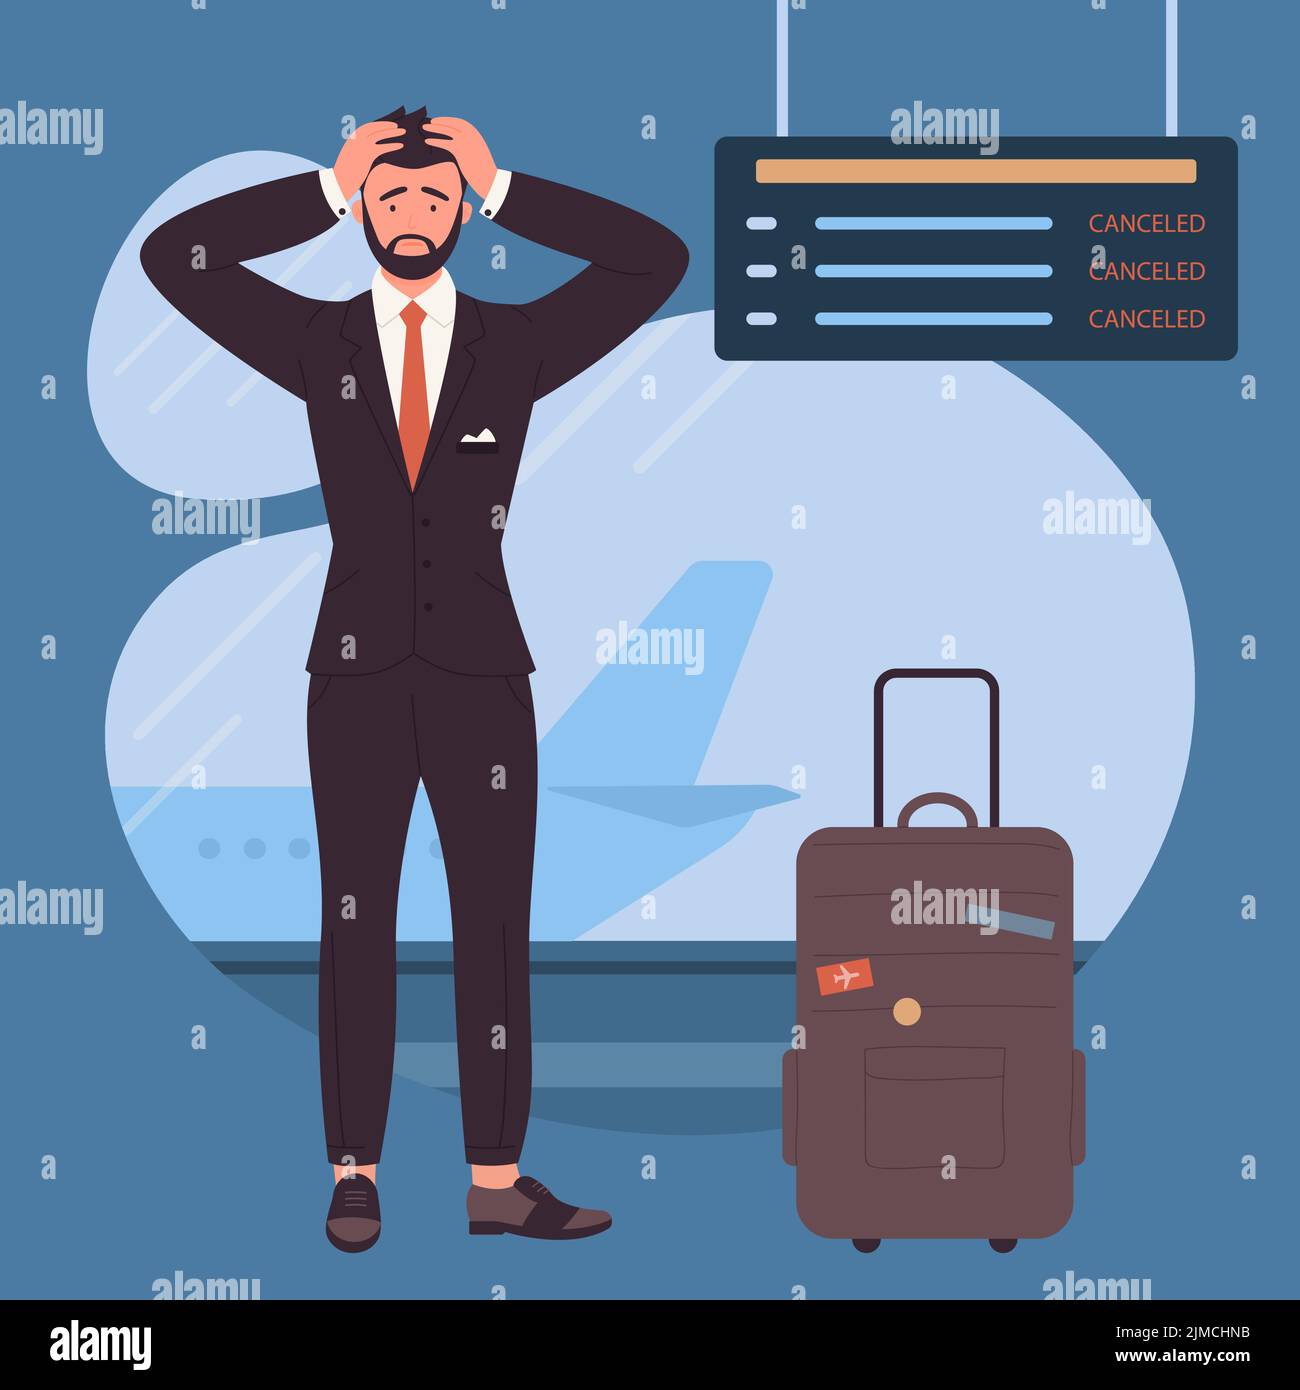 https://c8.alamy.com/comp/2JMCHNB/businessman-standing-near-airport-schedule-board-with-information-about-canceled-flights-vector-illustration-cartoon-unlucky-worried-man-in-suit-holding-head-in-fear-background-travel-concept-2JMCHNB.jpg